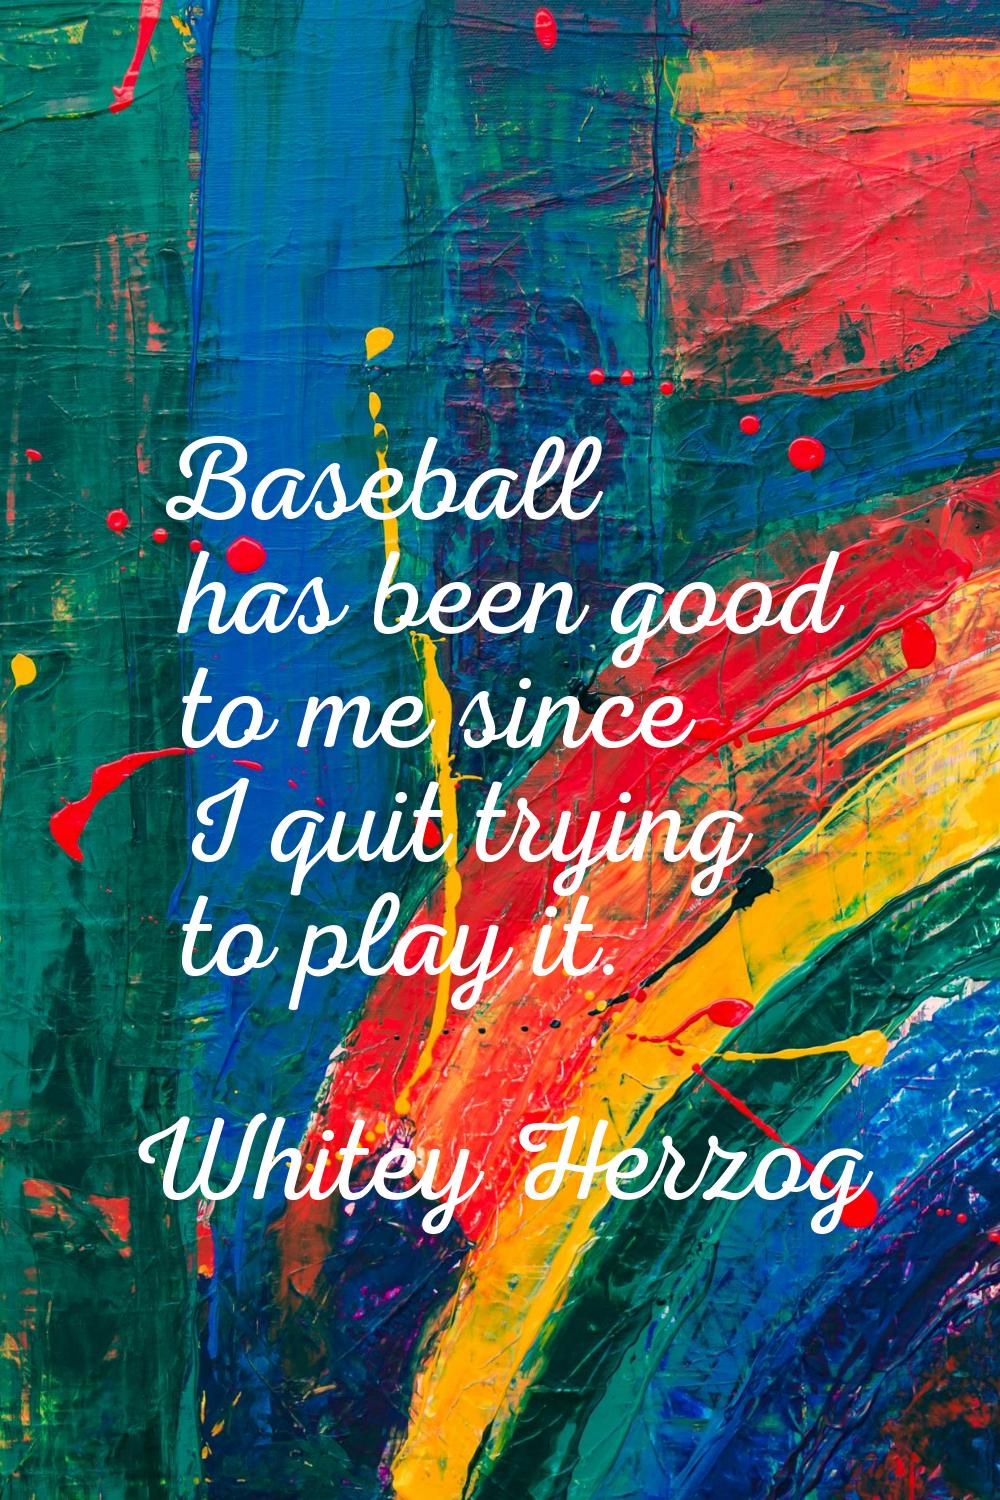 Baseball has been good to me since I quit trying to play it.